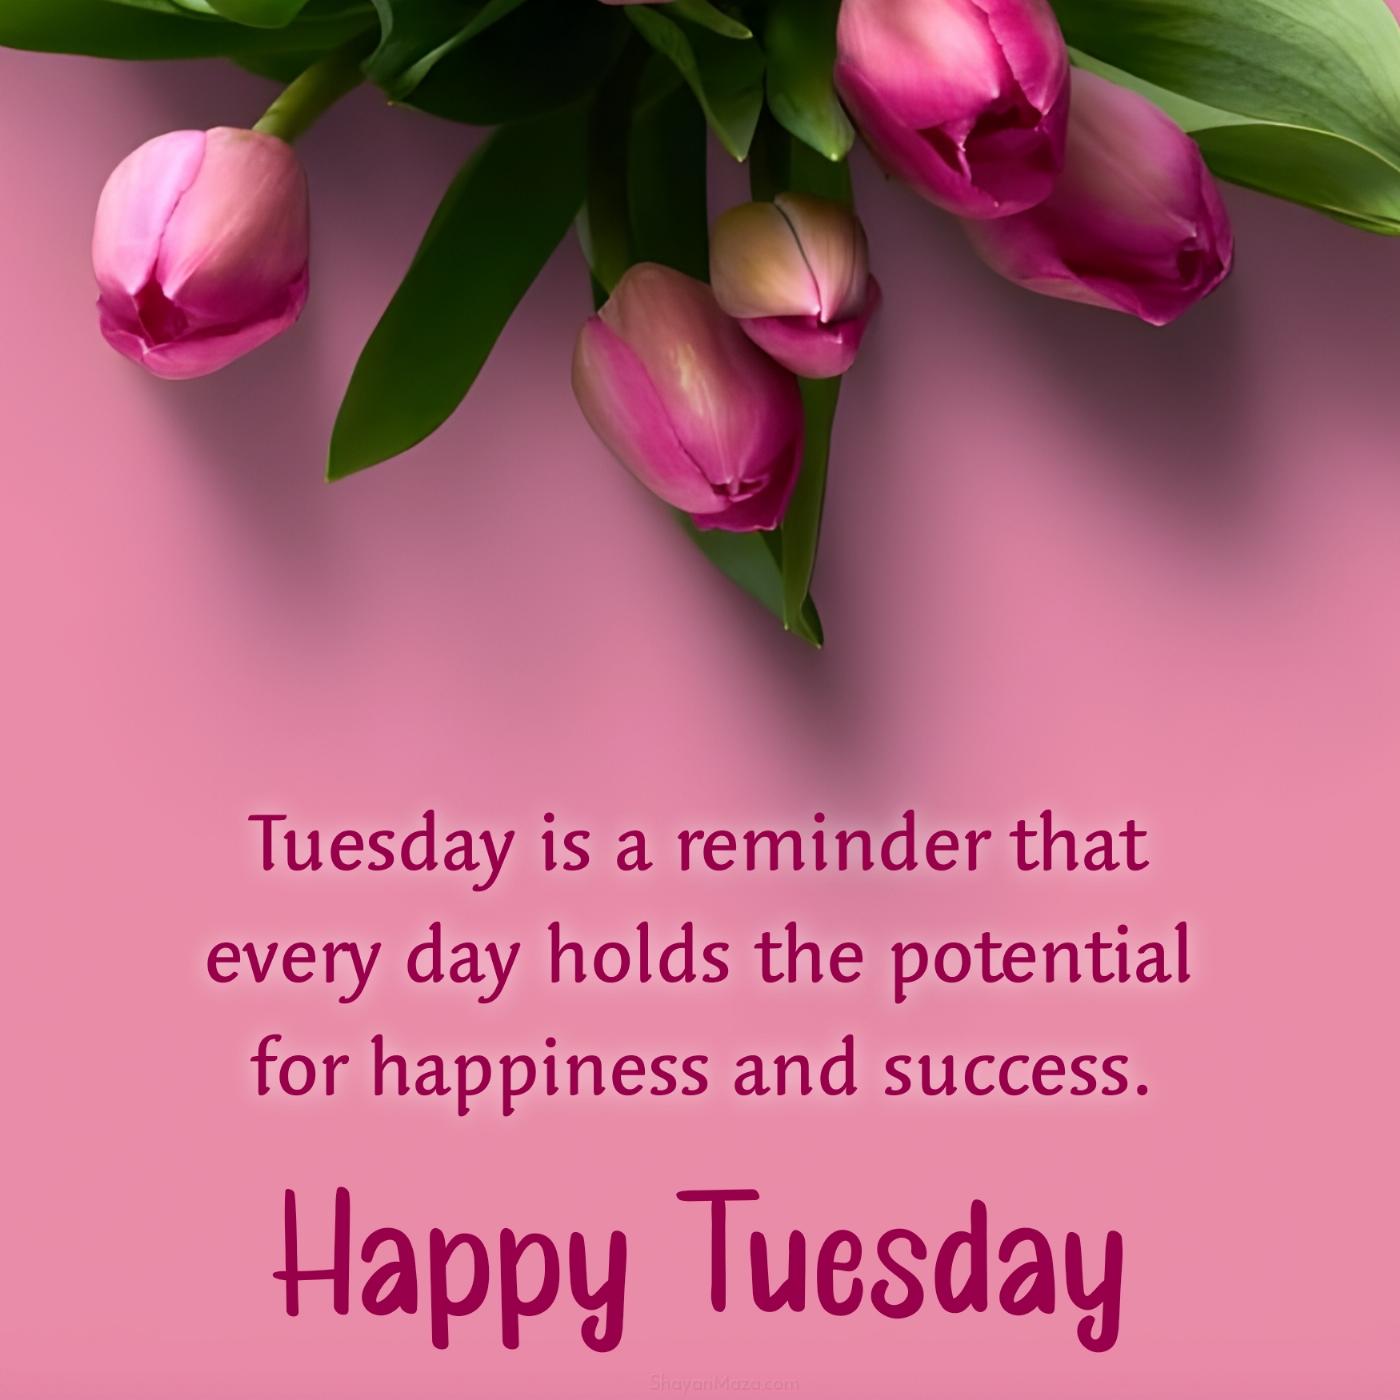 Tuesday is a reminder that every day holds the potential